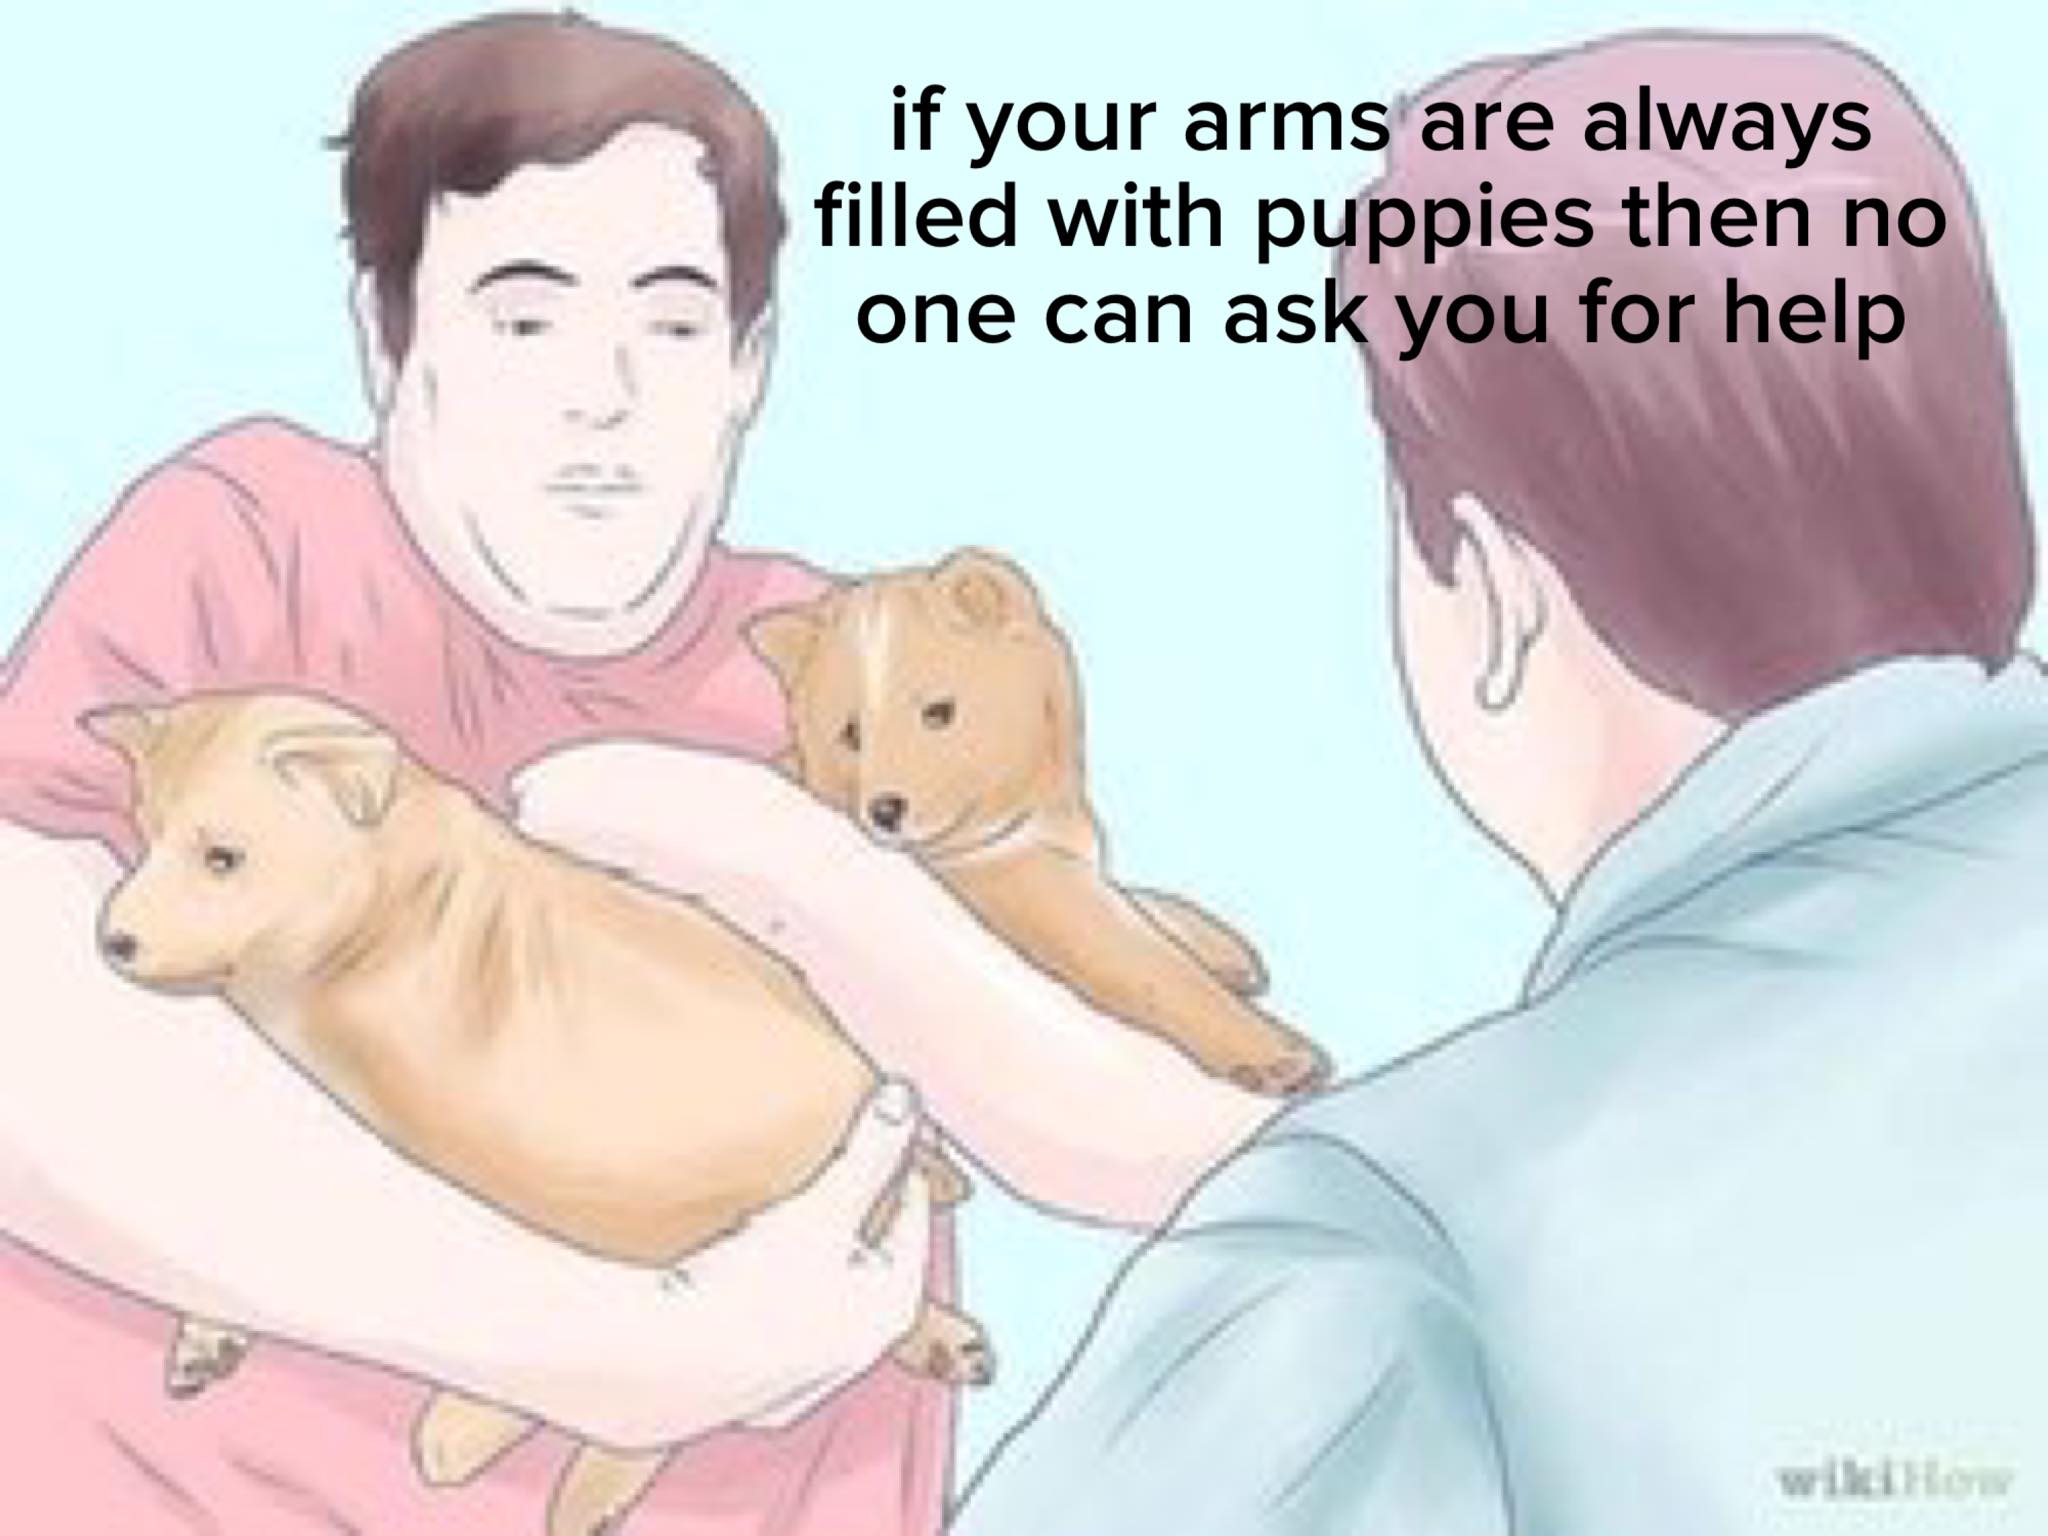 no context - if your arms are always filled with puppies then no one can ask you for help wikiHow